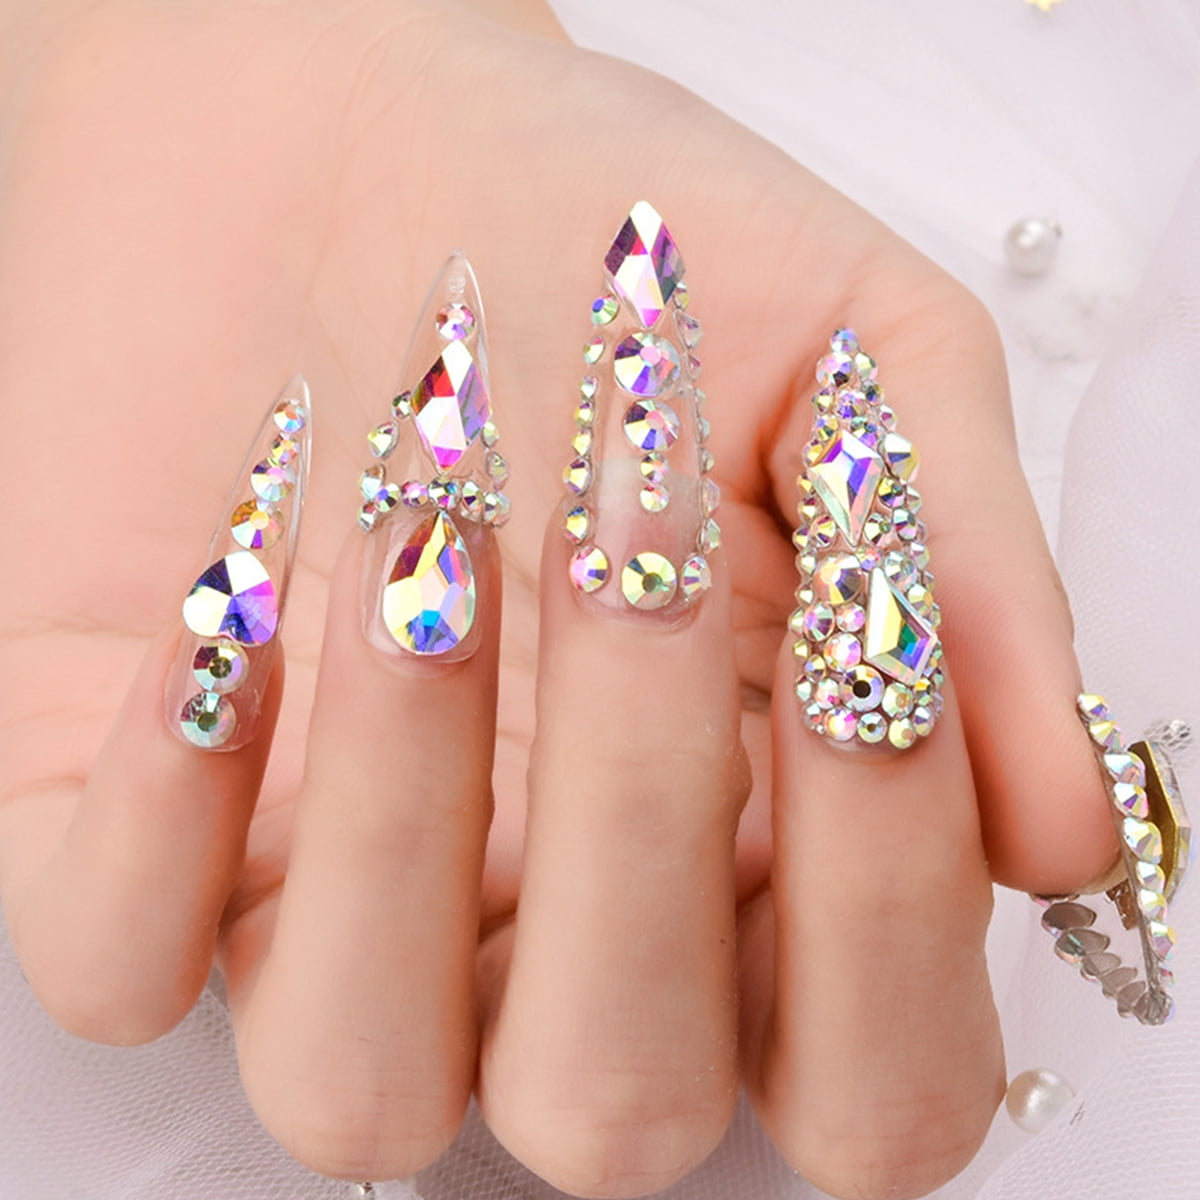 Rinstonestone for Nails, Anezus 4728Pcs Nail Gems with Crystals Rhinestones  Jewls Pickup Tool Pen for Nails, Nail Art Supplies Diamond Nails Stones for  Nails Decoration Makeup Clothes Shoes Multiple Shapes